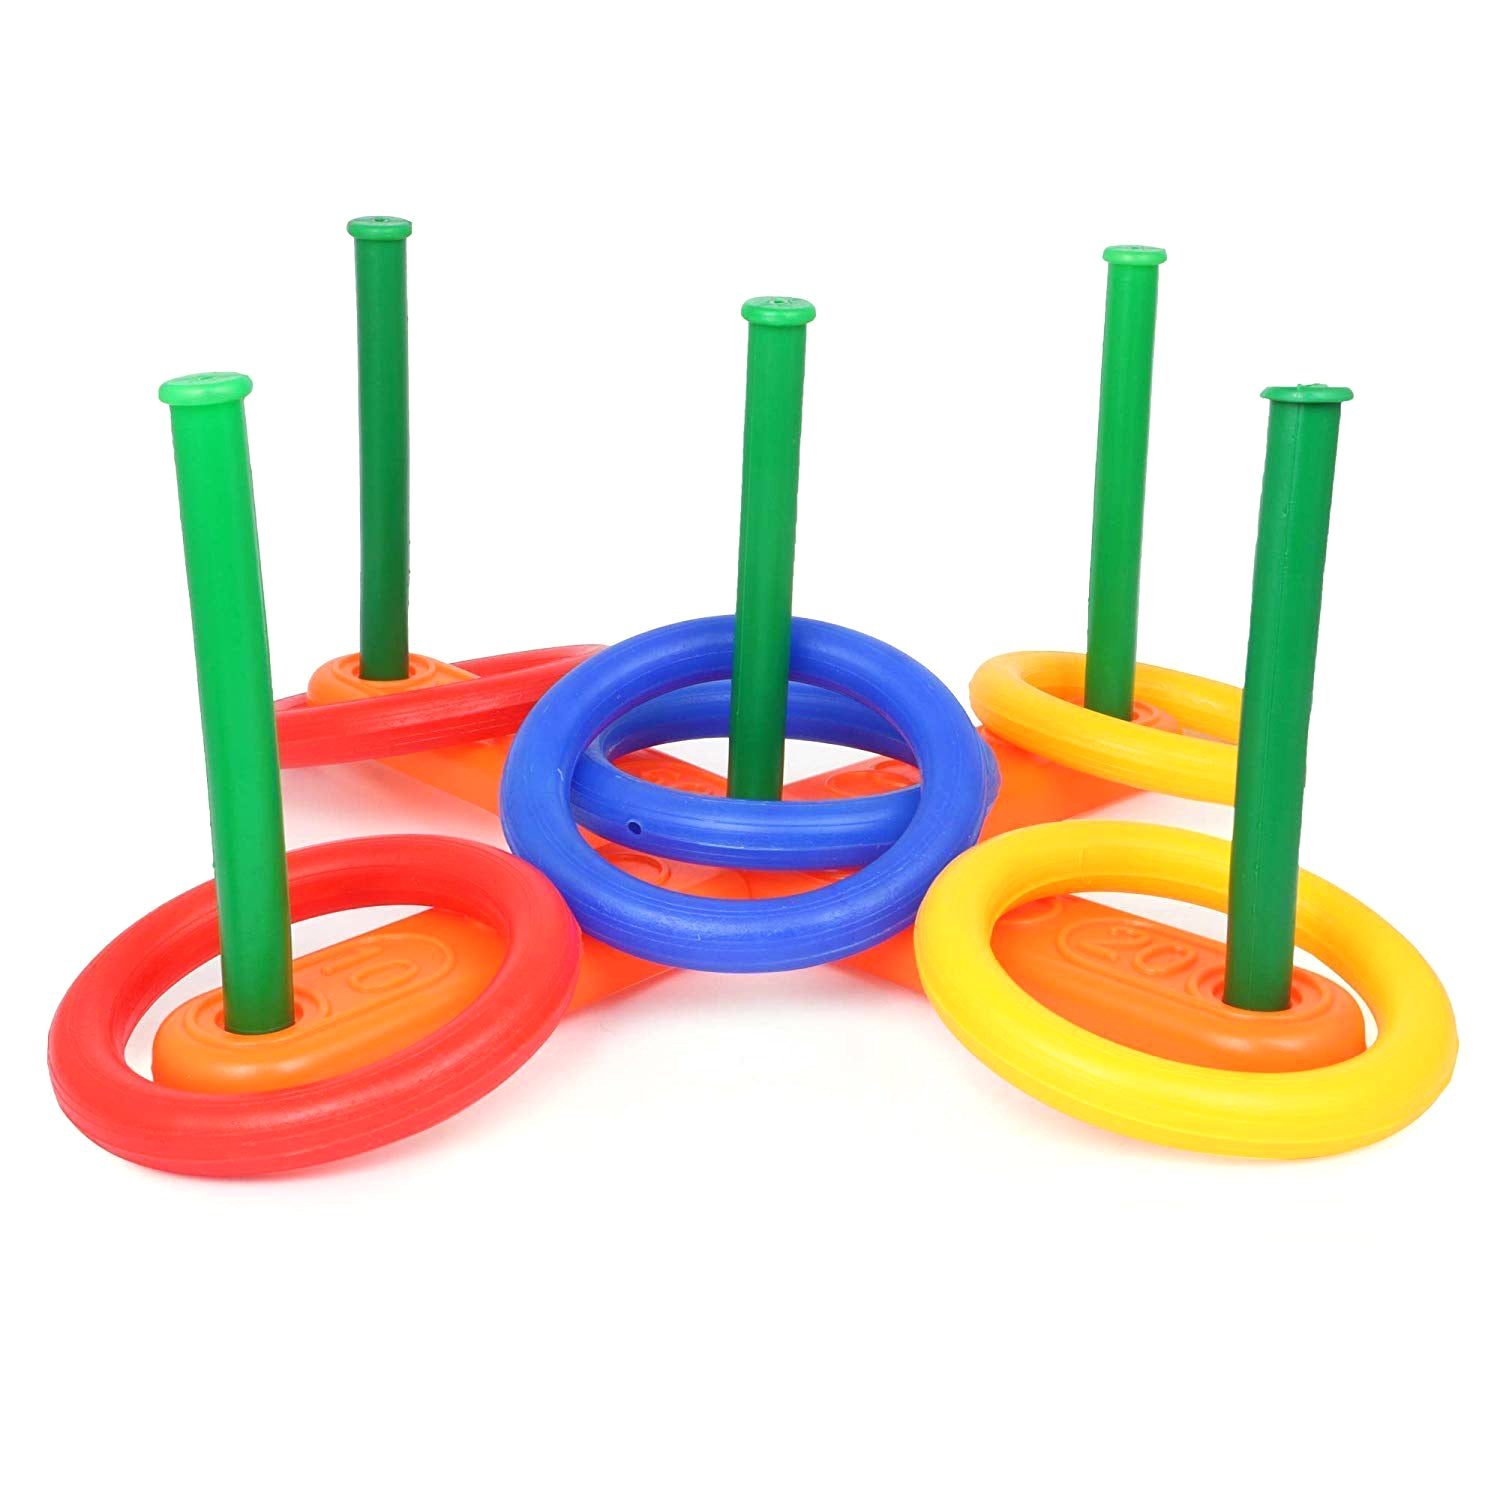 8078 13 Pc Ring Toss Game widely used by children’s and kids for playing and enjoying purposes and all in all kinds of household and official places etc. DeoDap